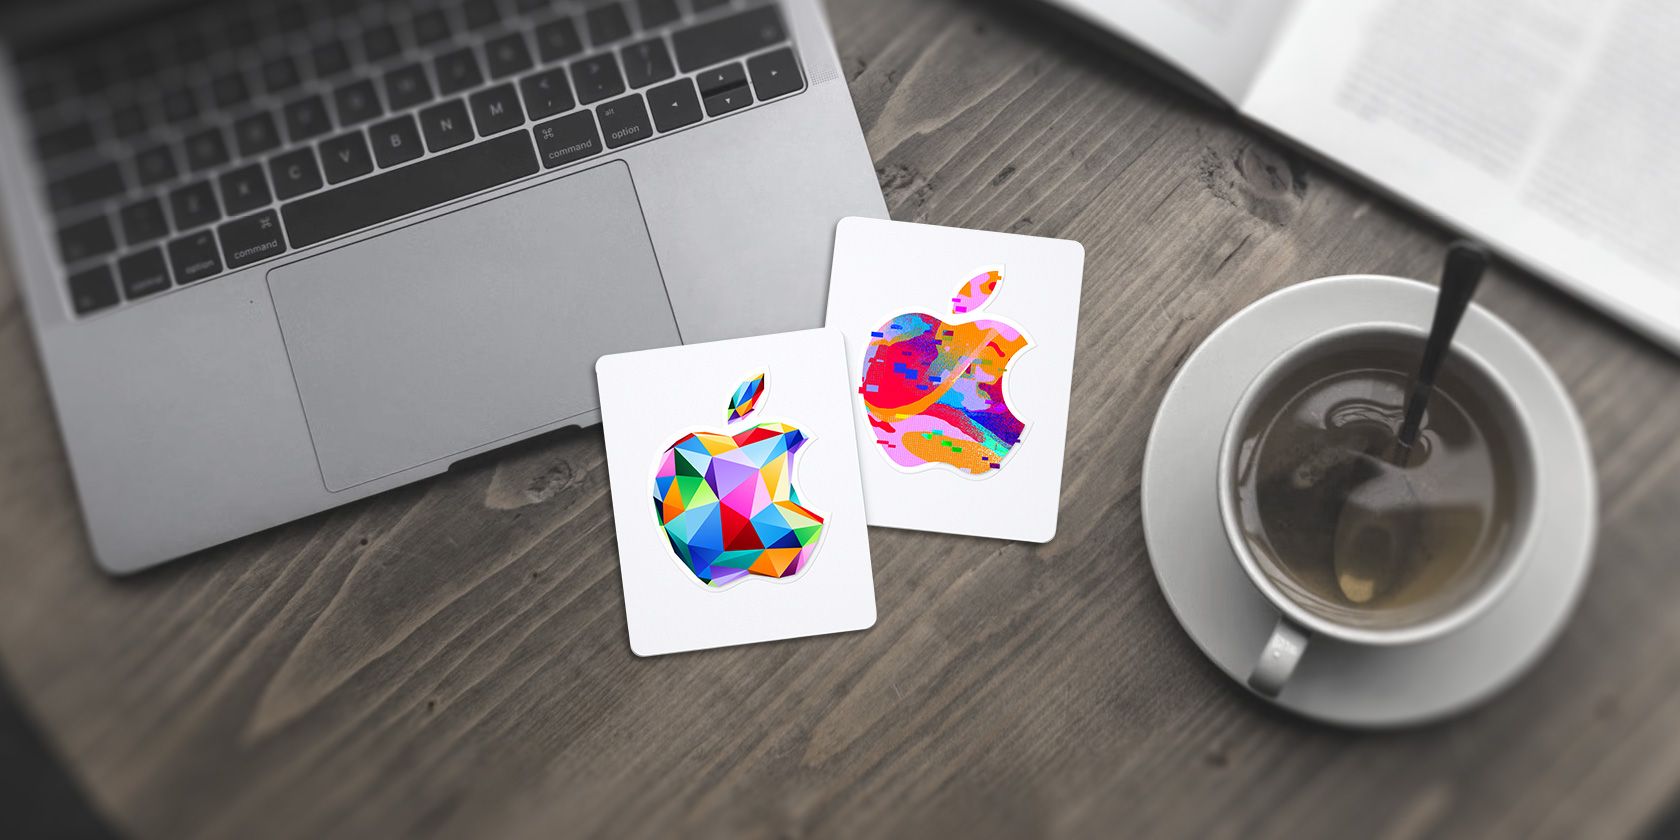 5 Things You Can Buy With Your Apple Gift Cards or Apple Account Balance